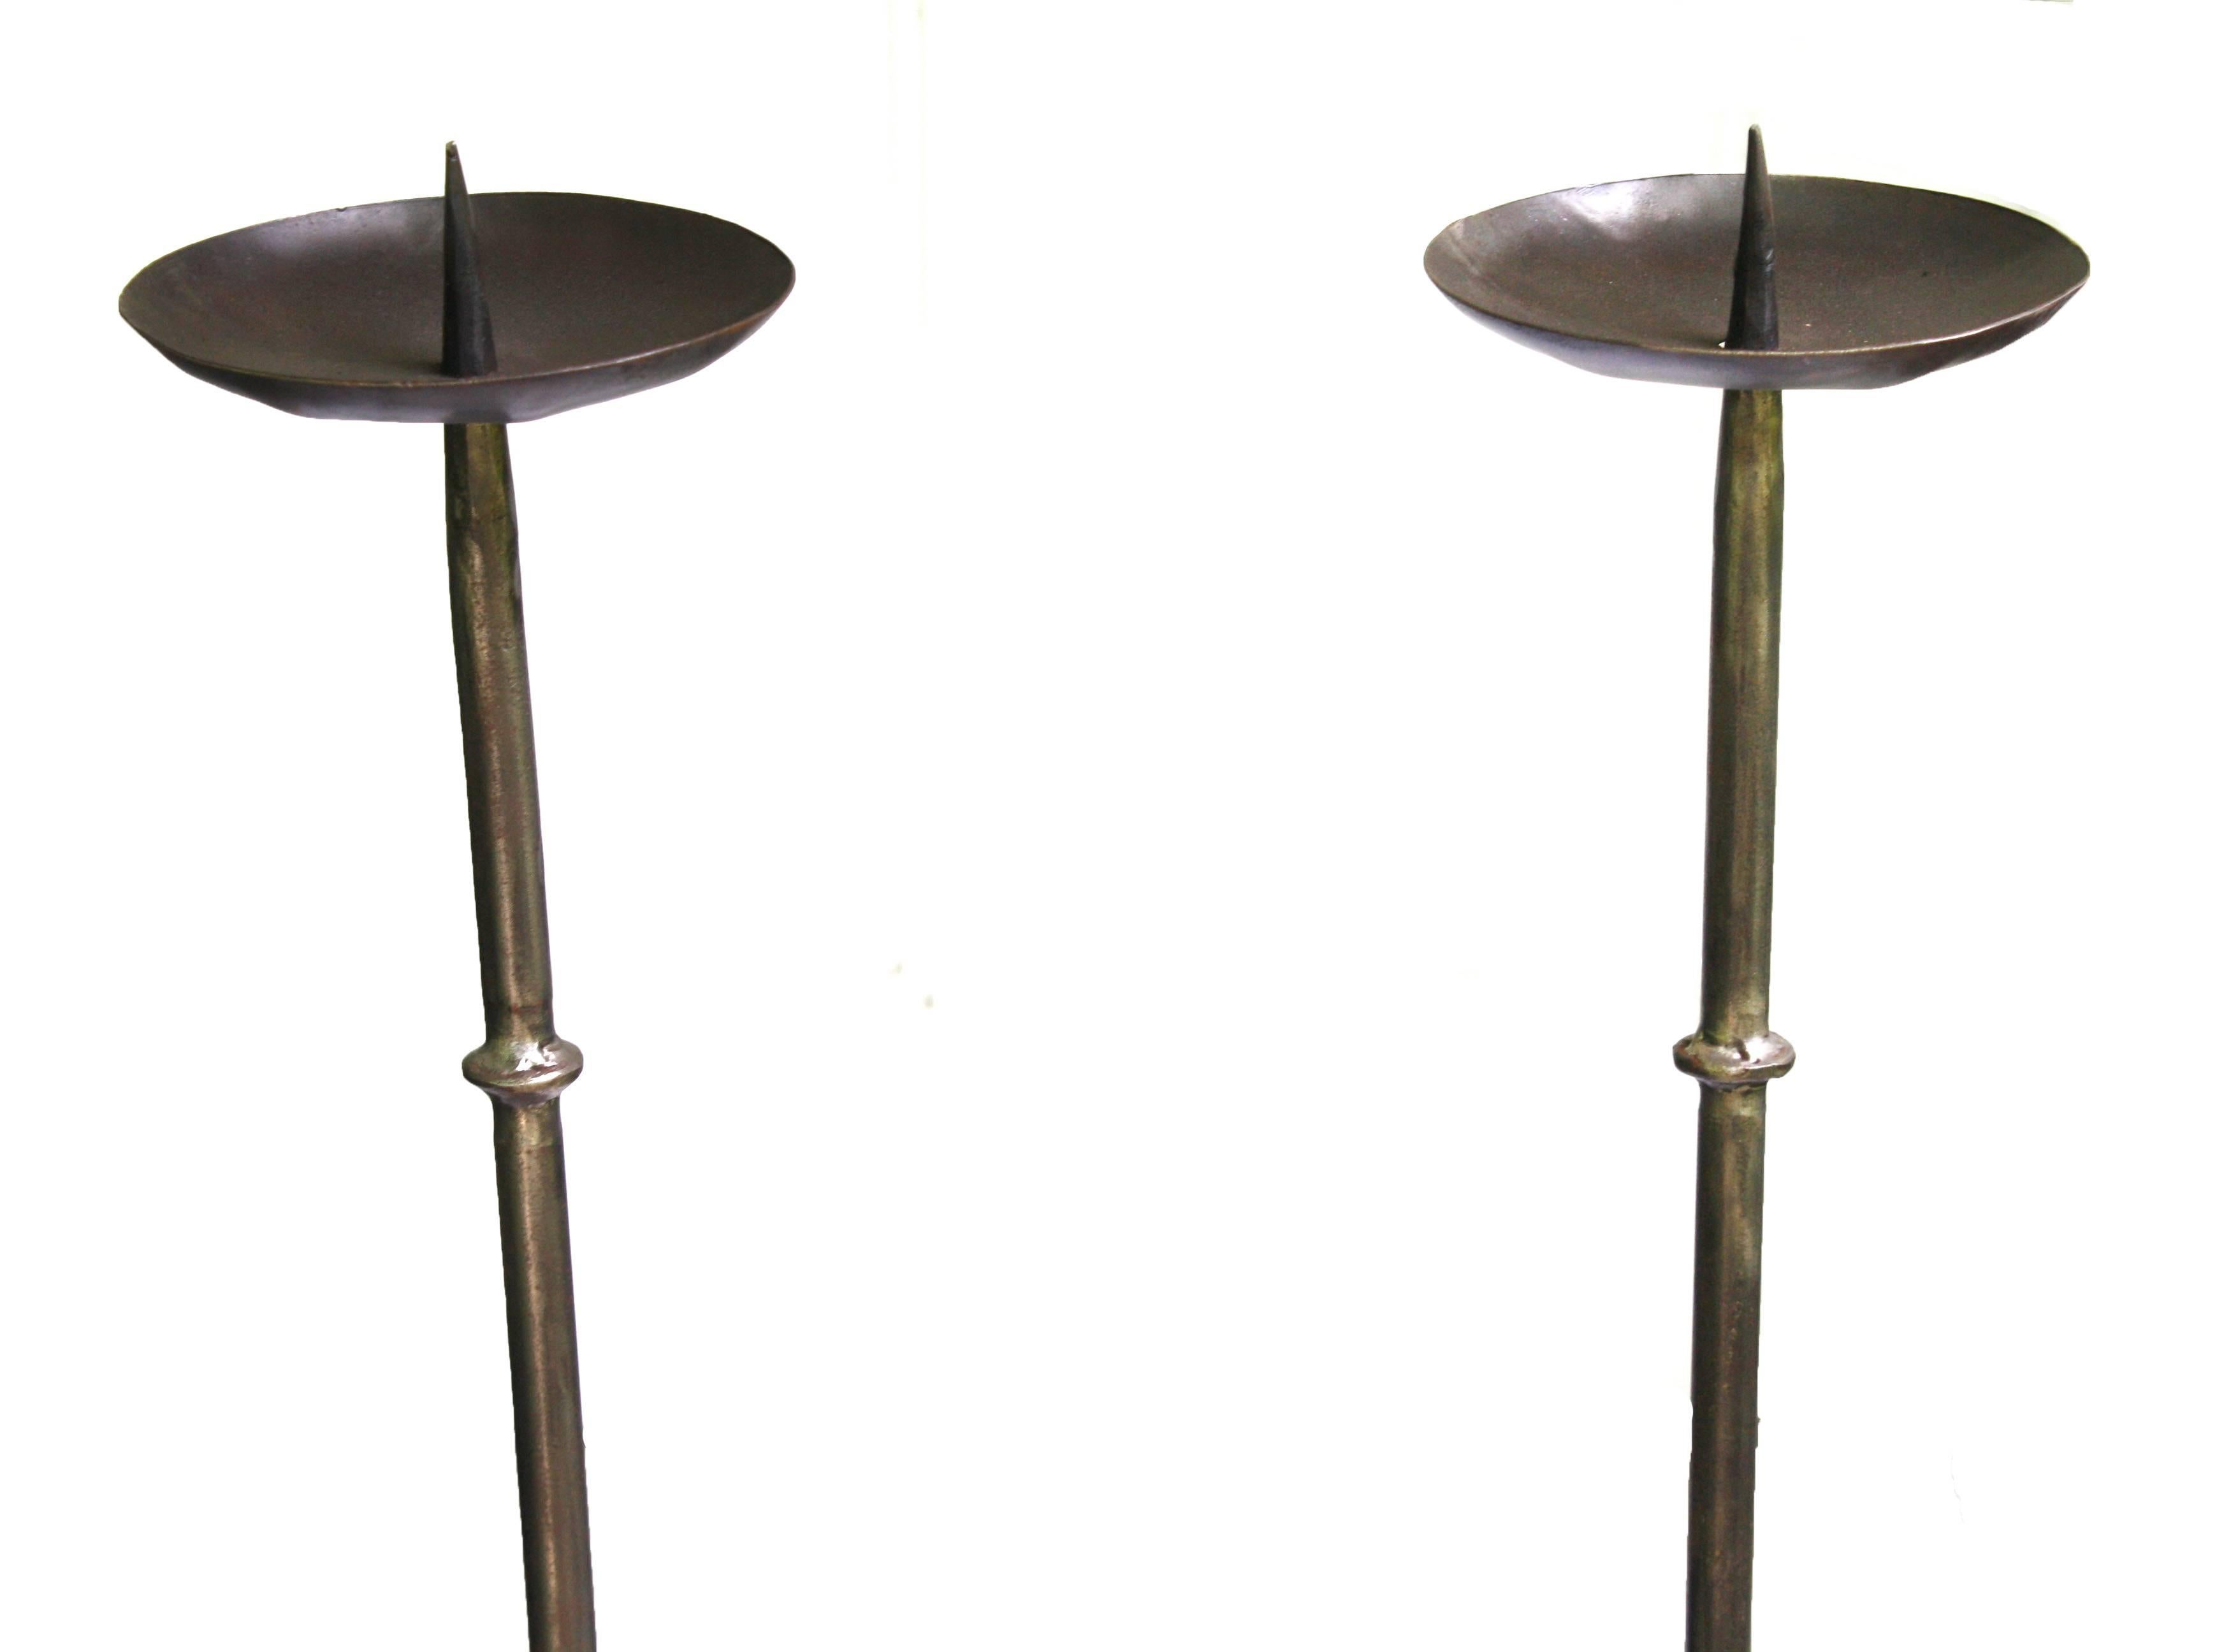 In the manner of mid-18th century Georgian iron-cast tripod prickets; each with four ring turnings, generous bobeches for wax drippings and standing well over four feet tall with candles. Just cleaned and fully restored by a master metalsmith; they